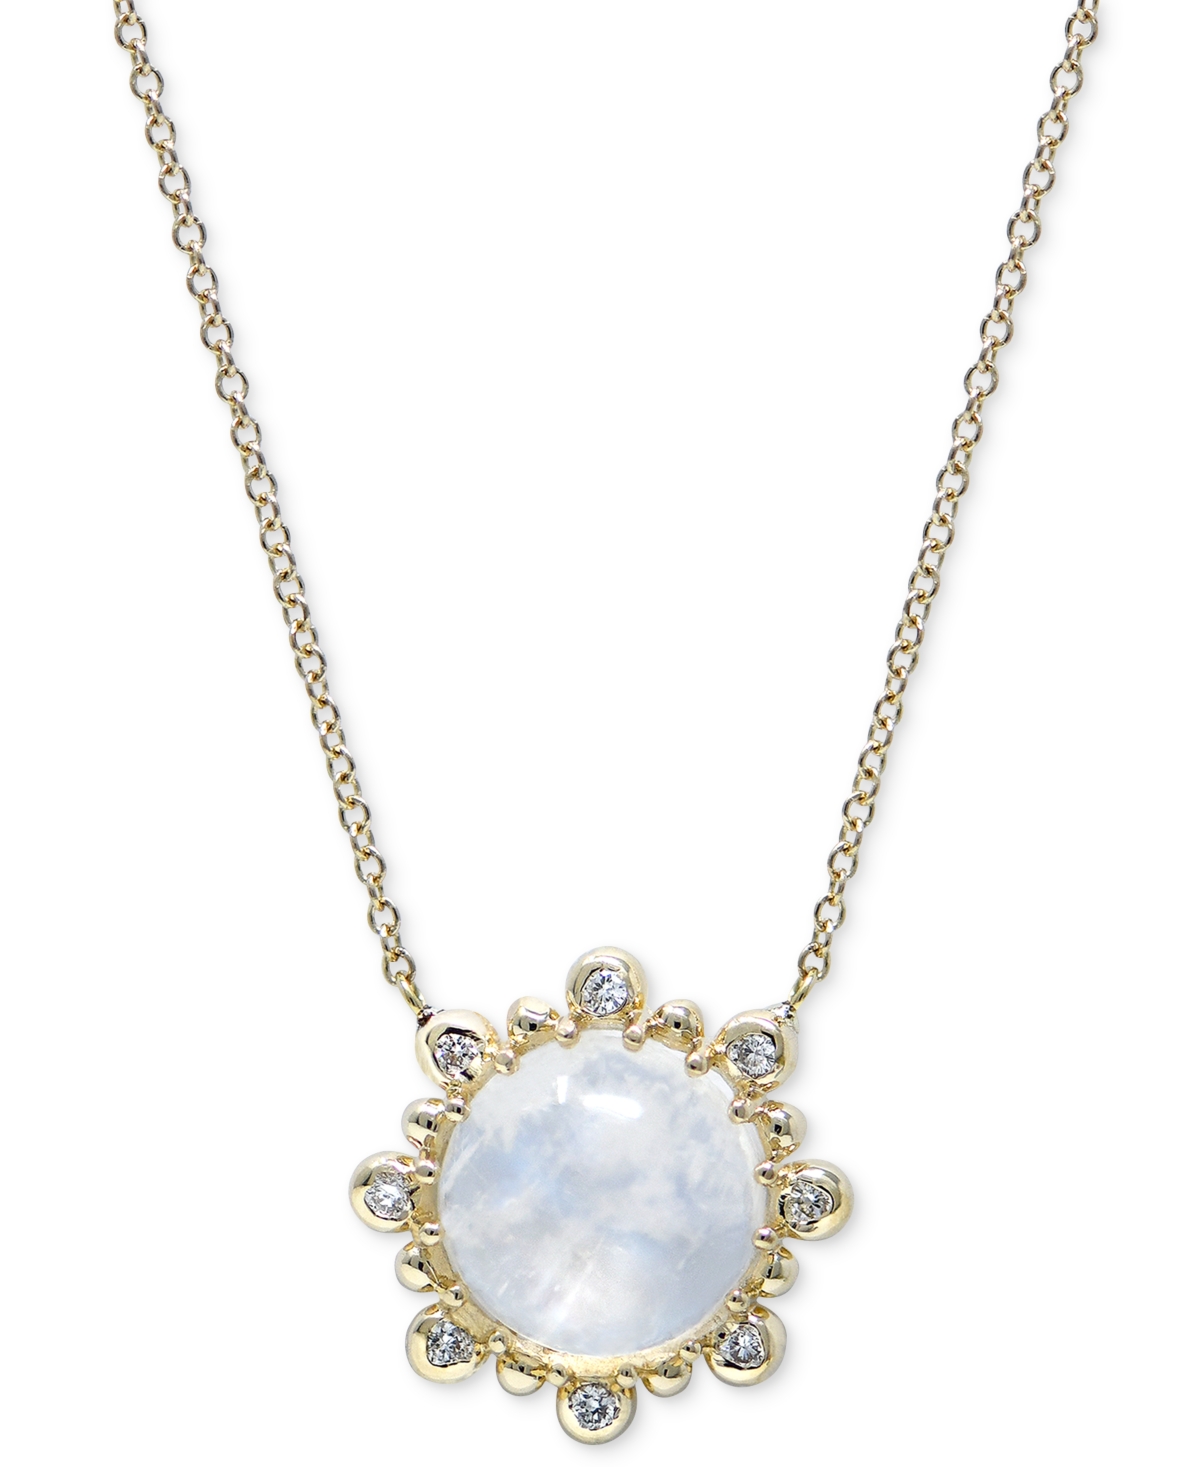 Moonstone & Diamond (1/8 ct. t.w.) Pendant Necklace in 14k Gold, 16" + 1" extender - Gold